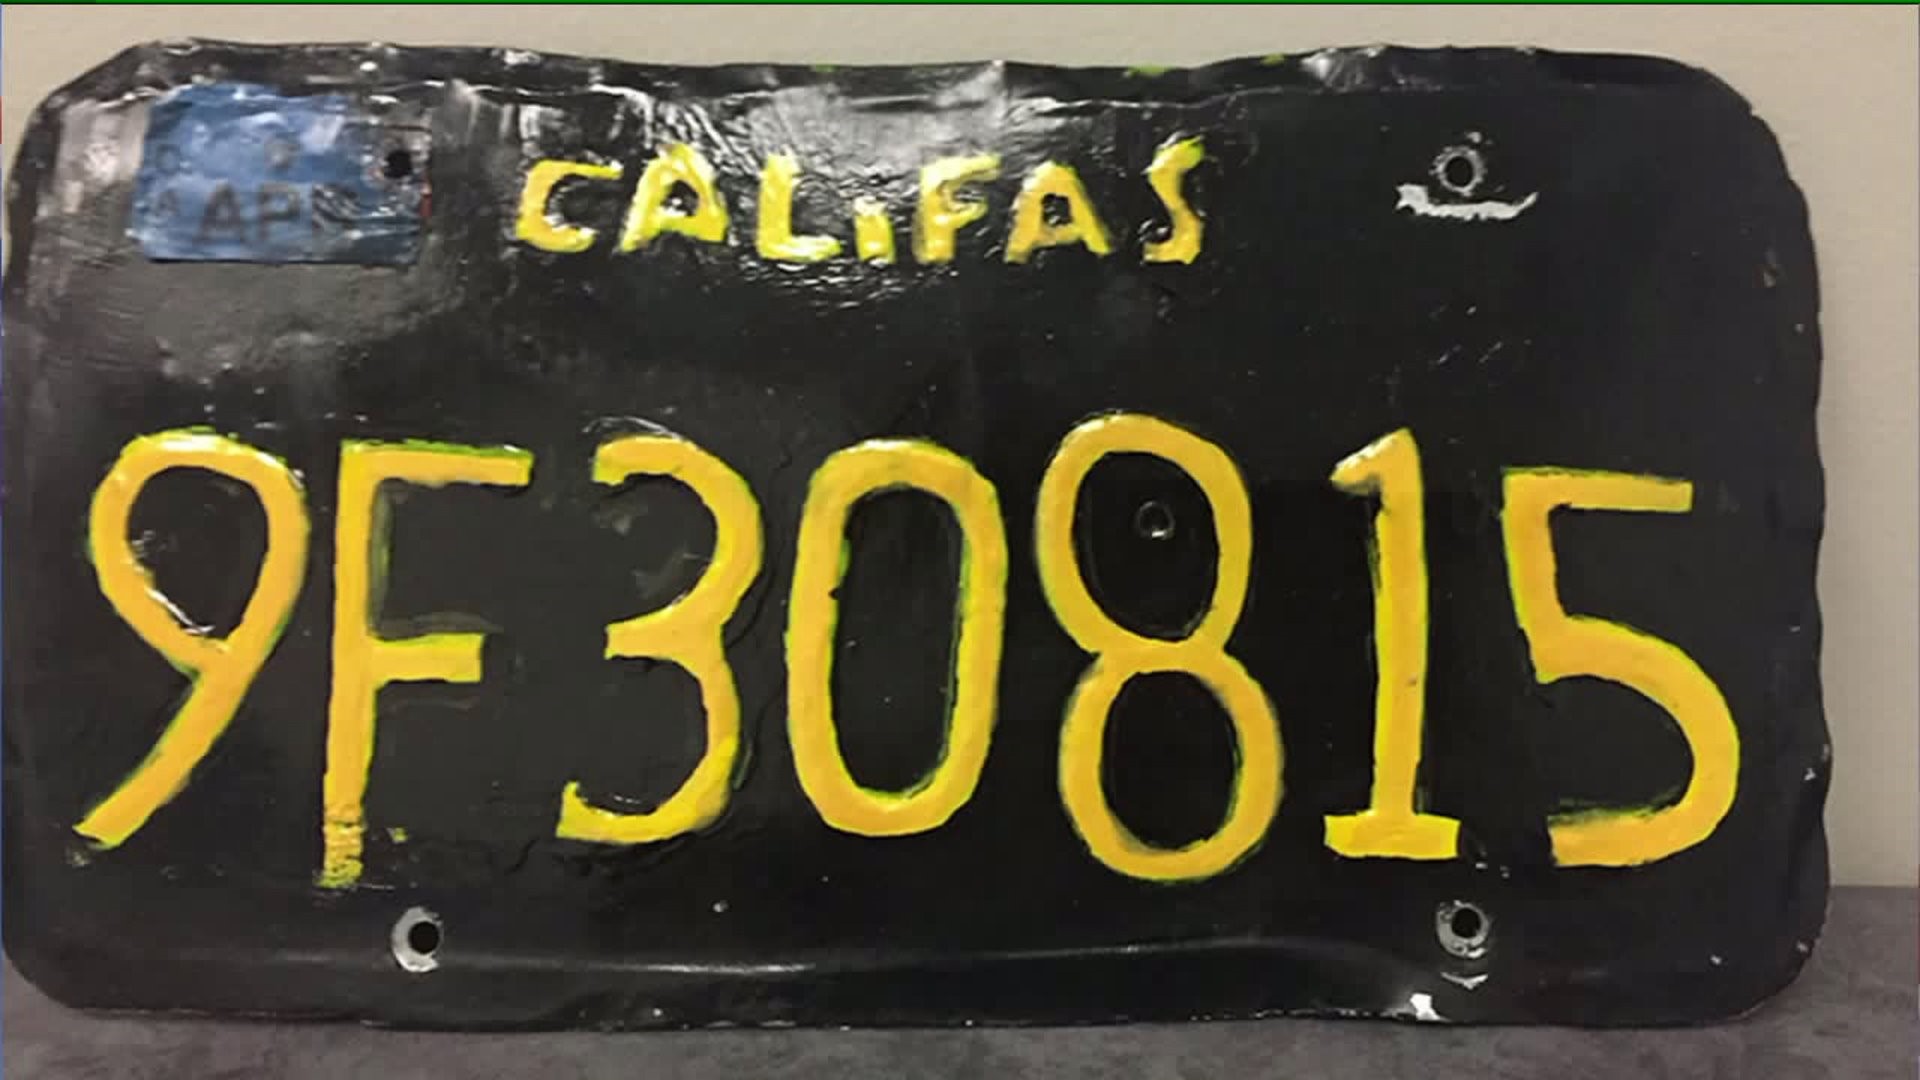 `Califas`: Homemade license plate on big rig leads to DUI arrest